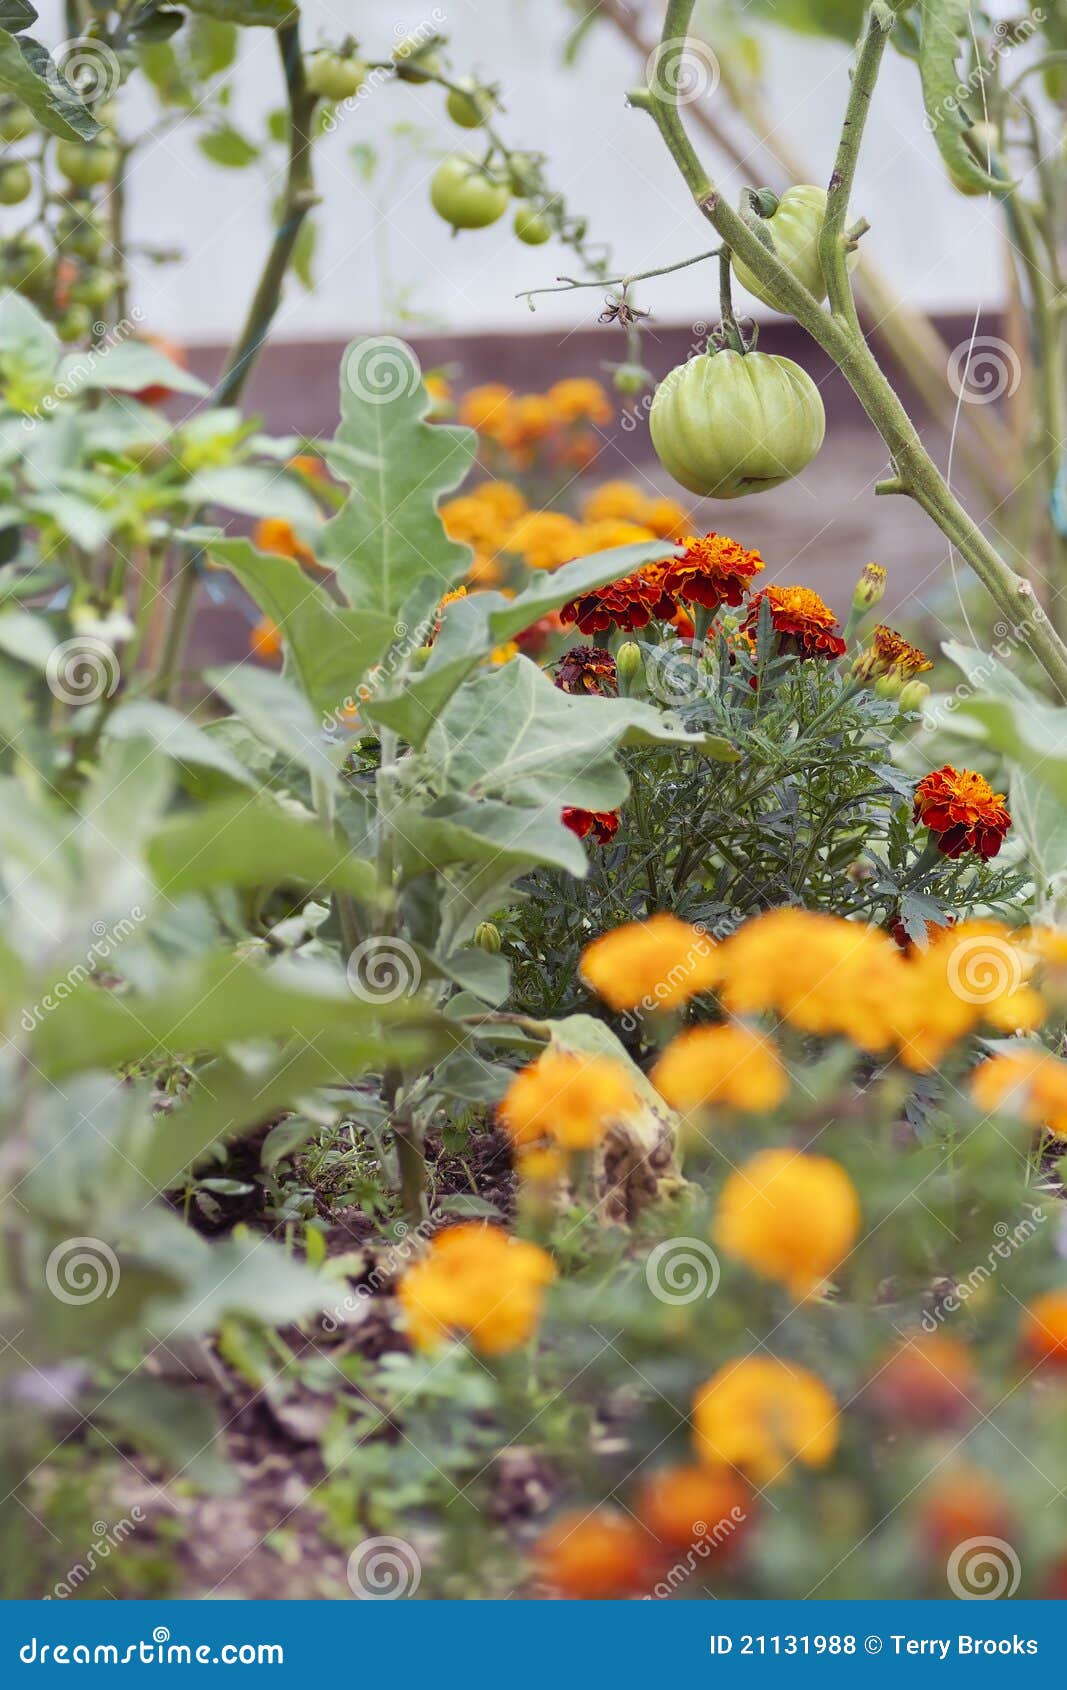 tomatoes and marigolds (companion planting)